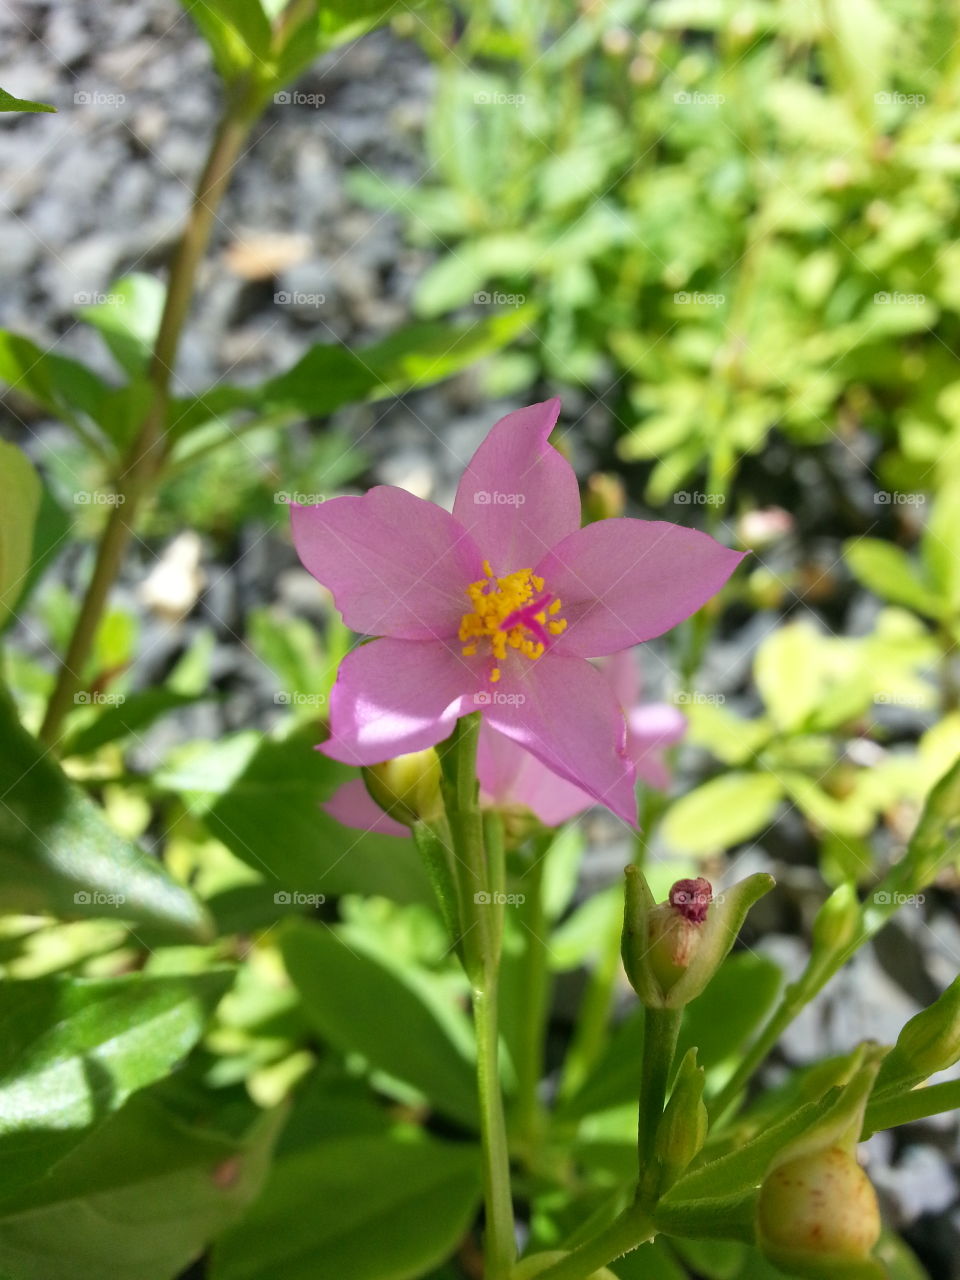 a small pink flower